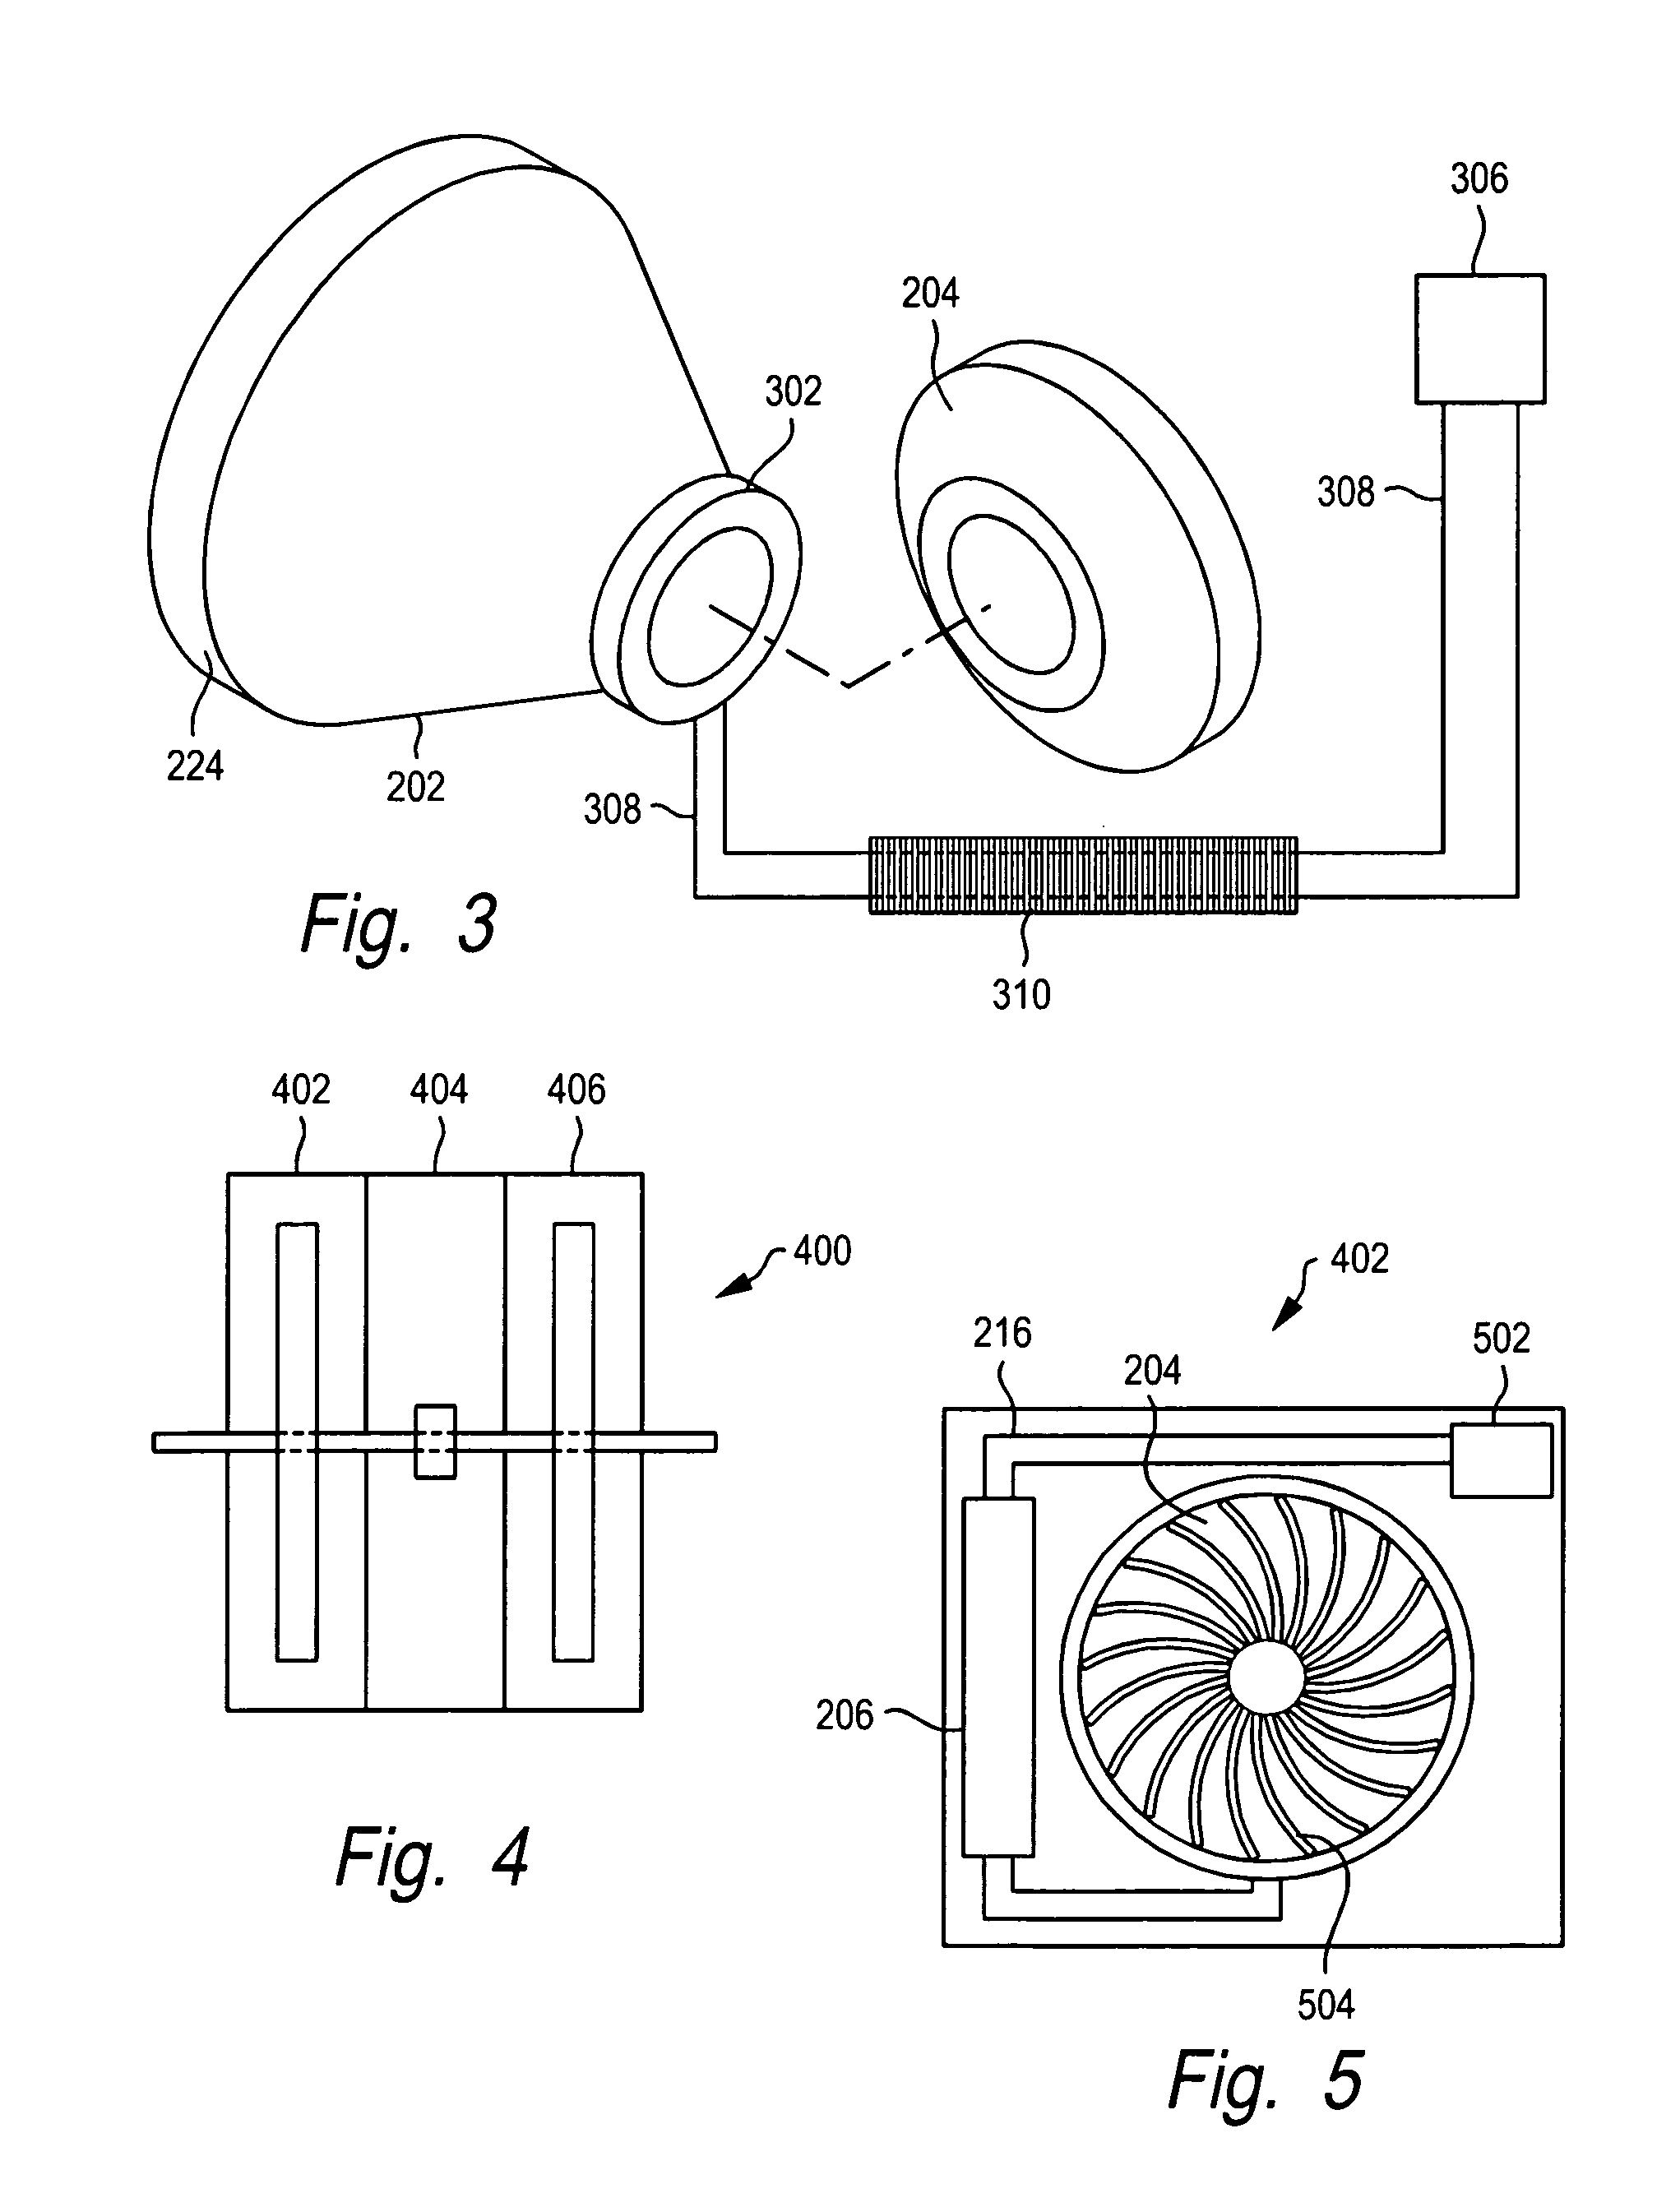 Asynchronous combustion system